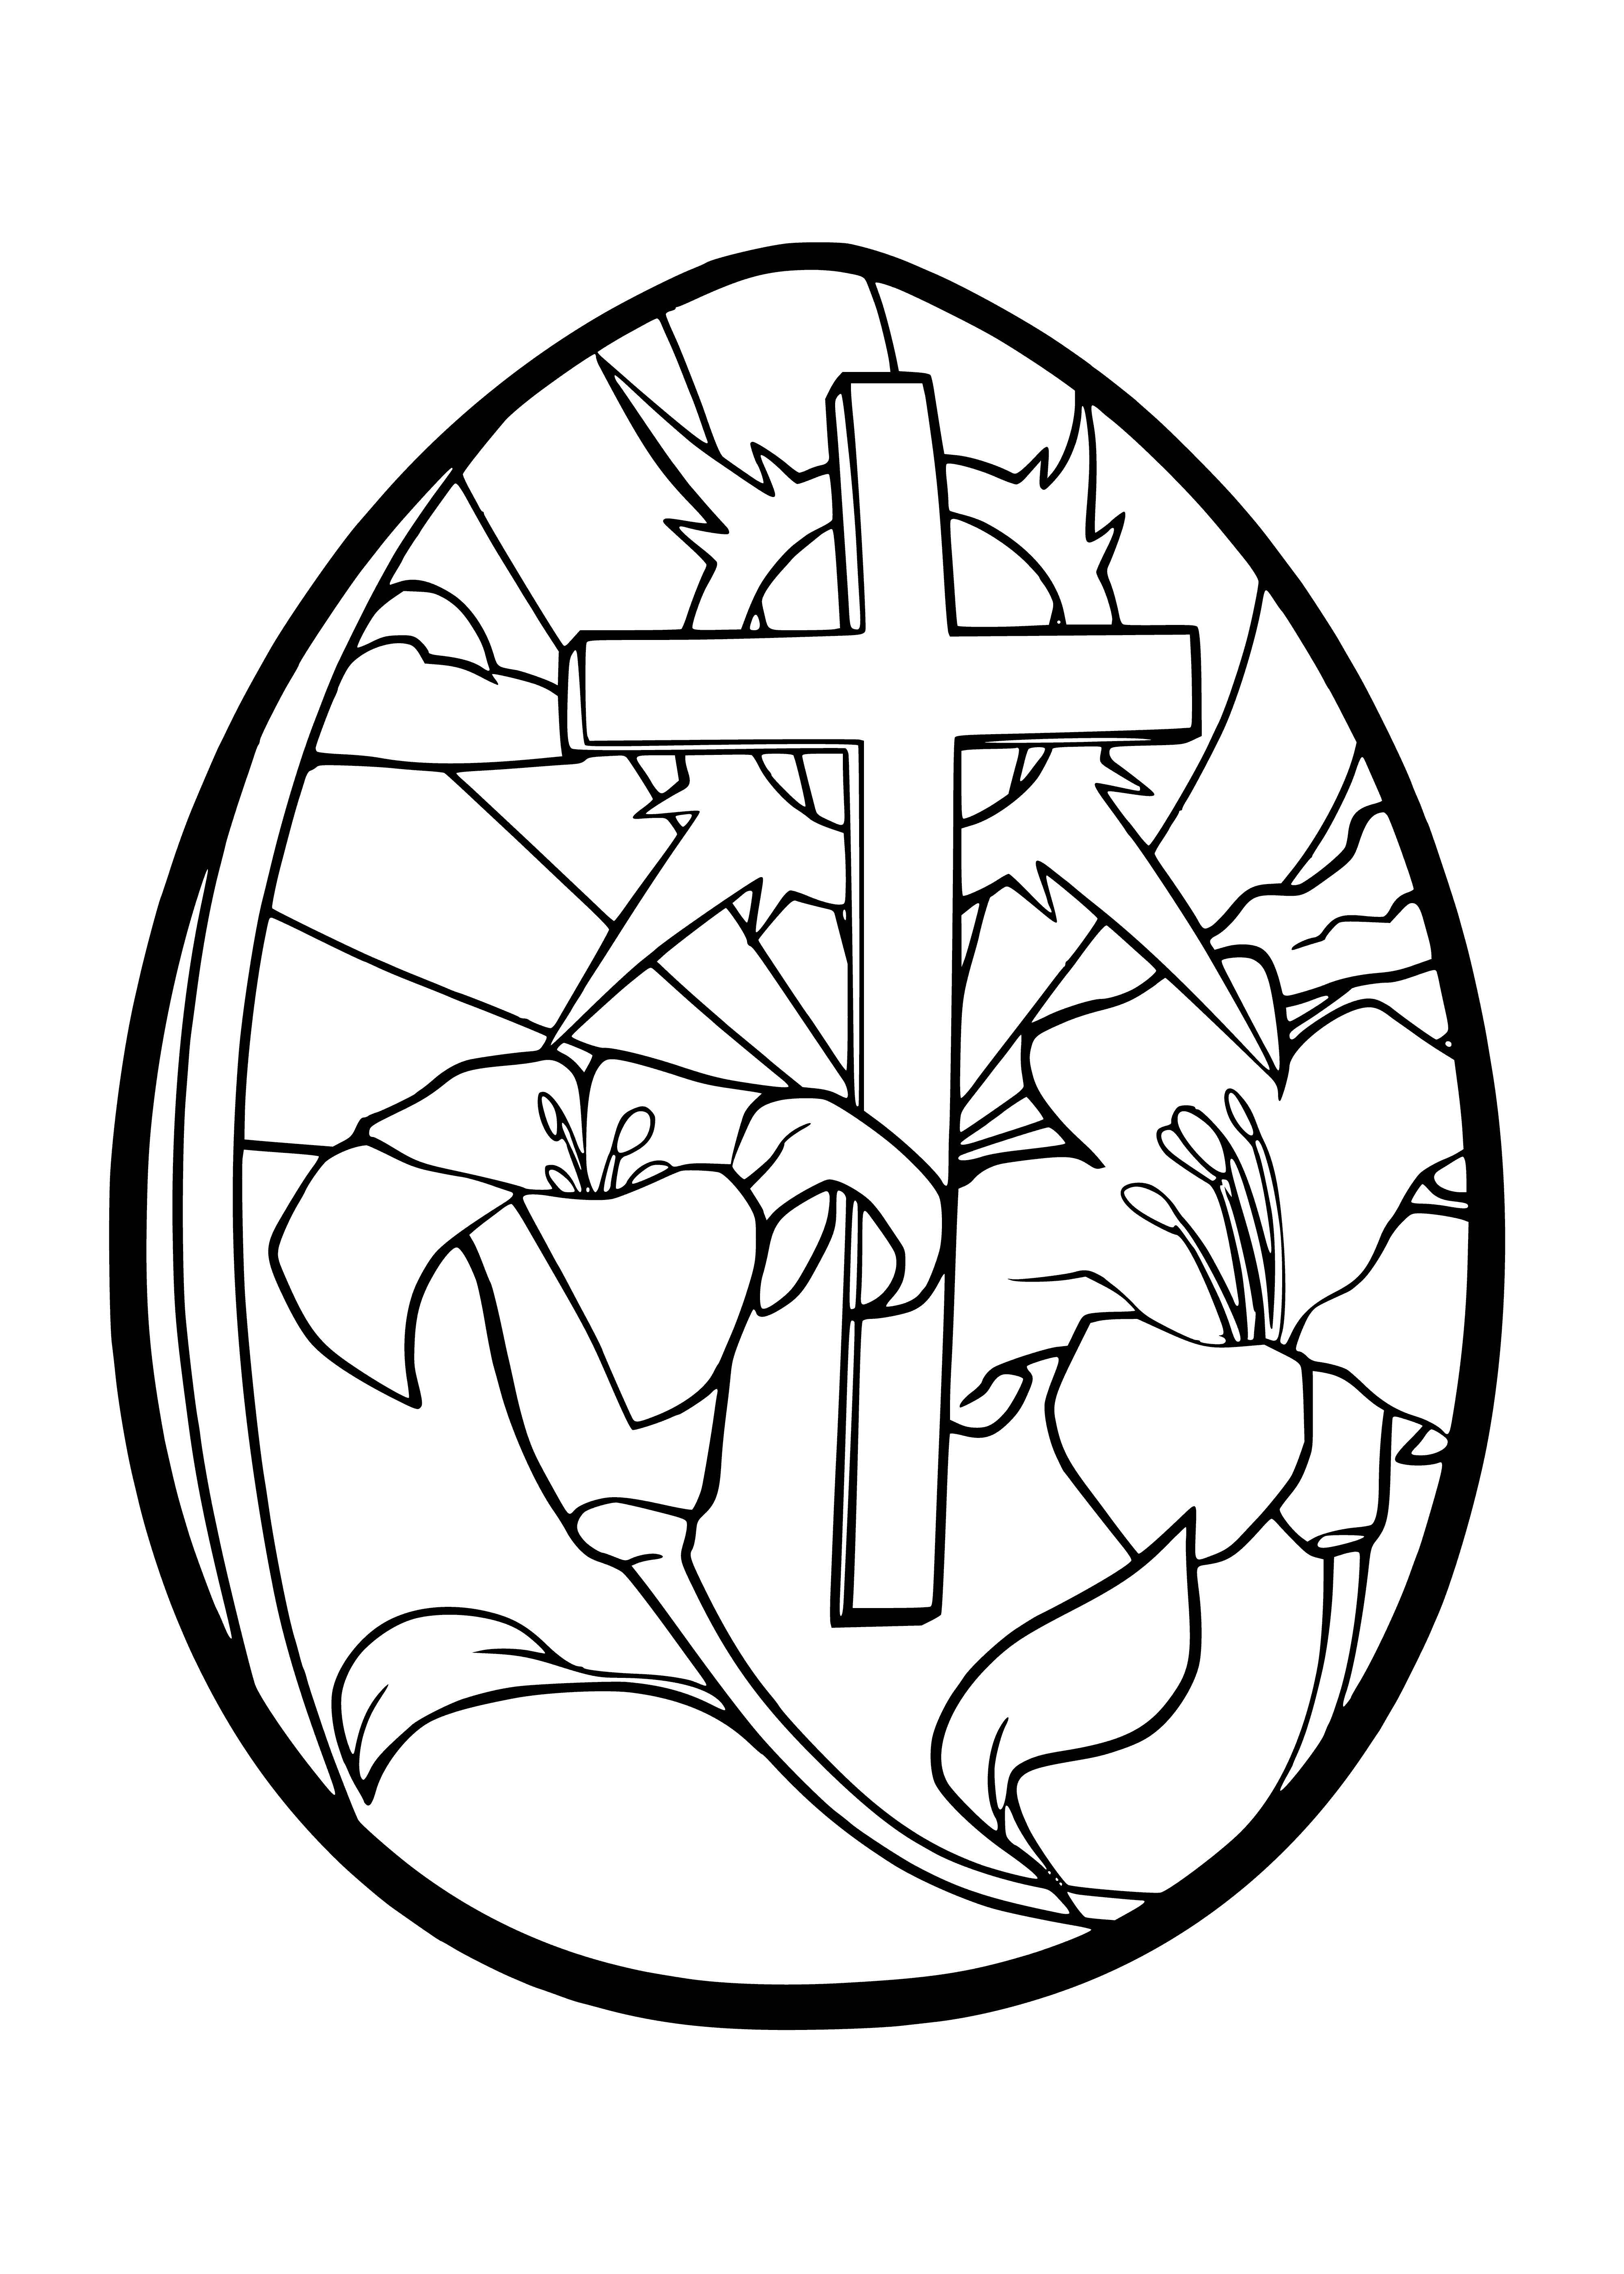 coloring page: Easter basket full of colored eggs- a symbol of joy & renewal!